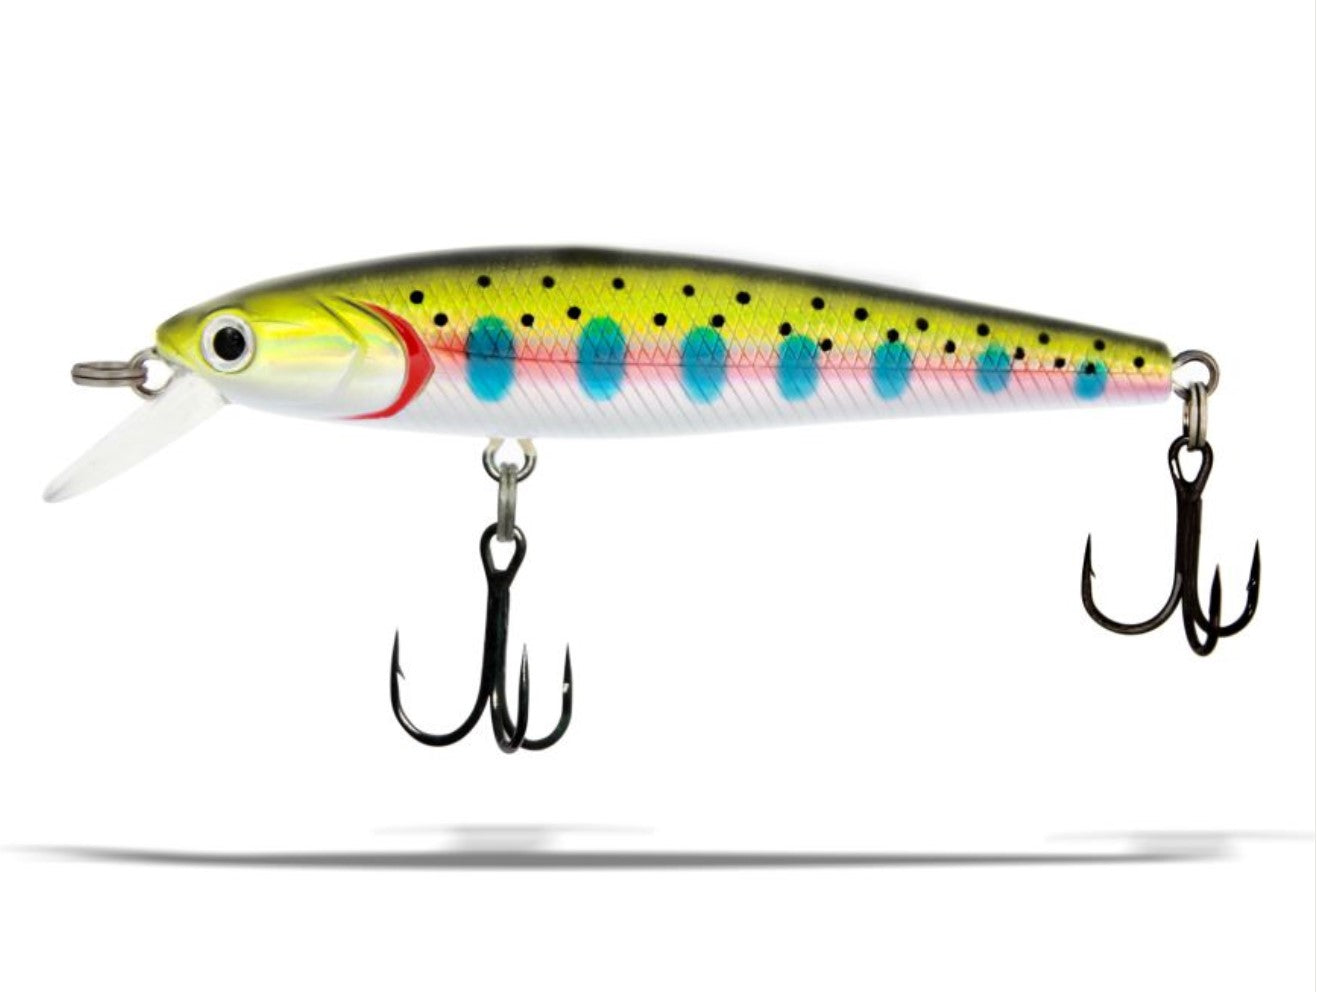 Dynamic Lures HD Trout (RB Trout V2) – Trophy Trout Lures and Fly Fishing